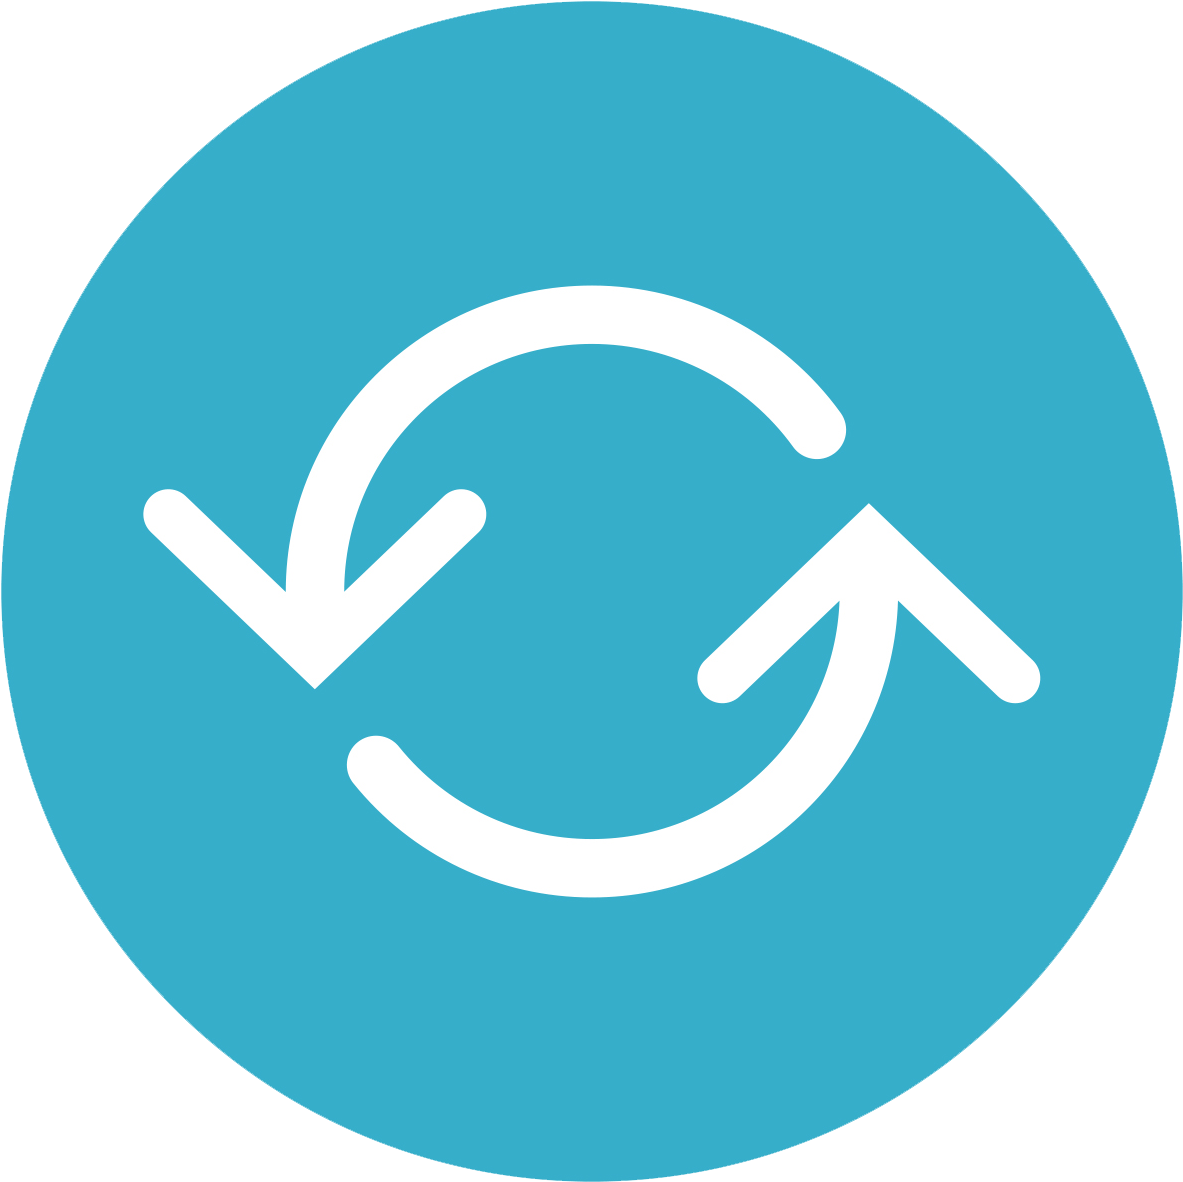 A Blue Circle With White Arrows